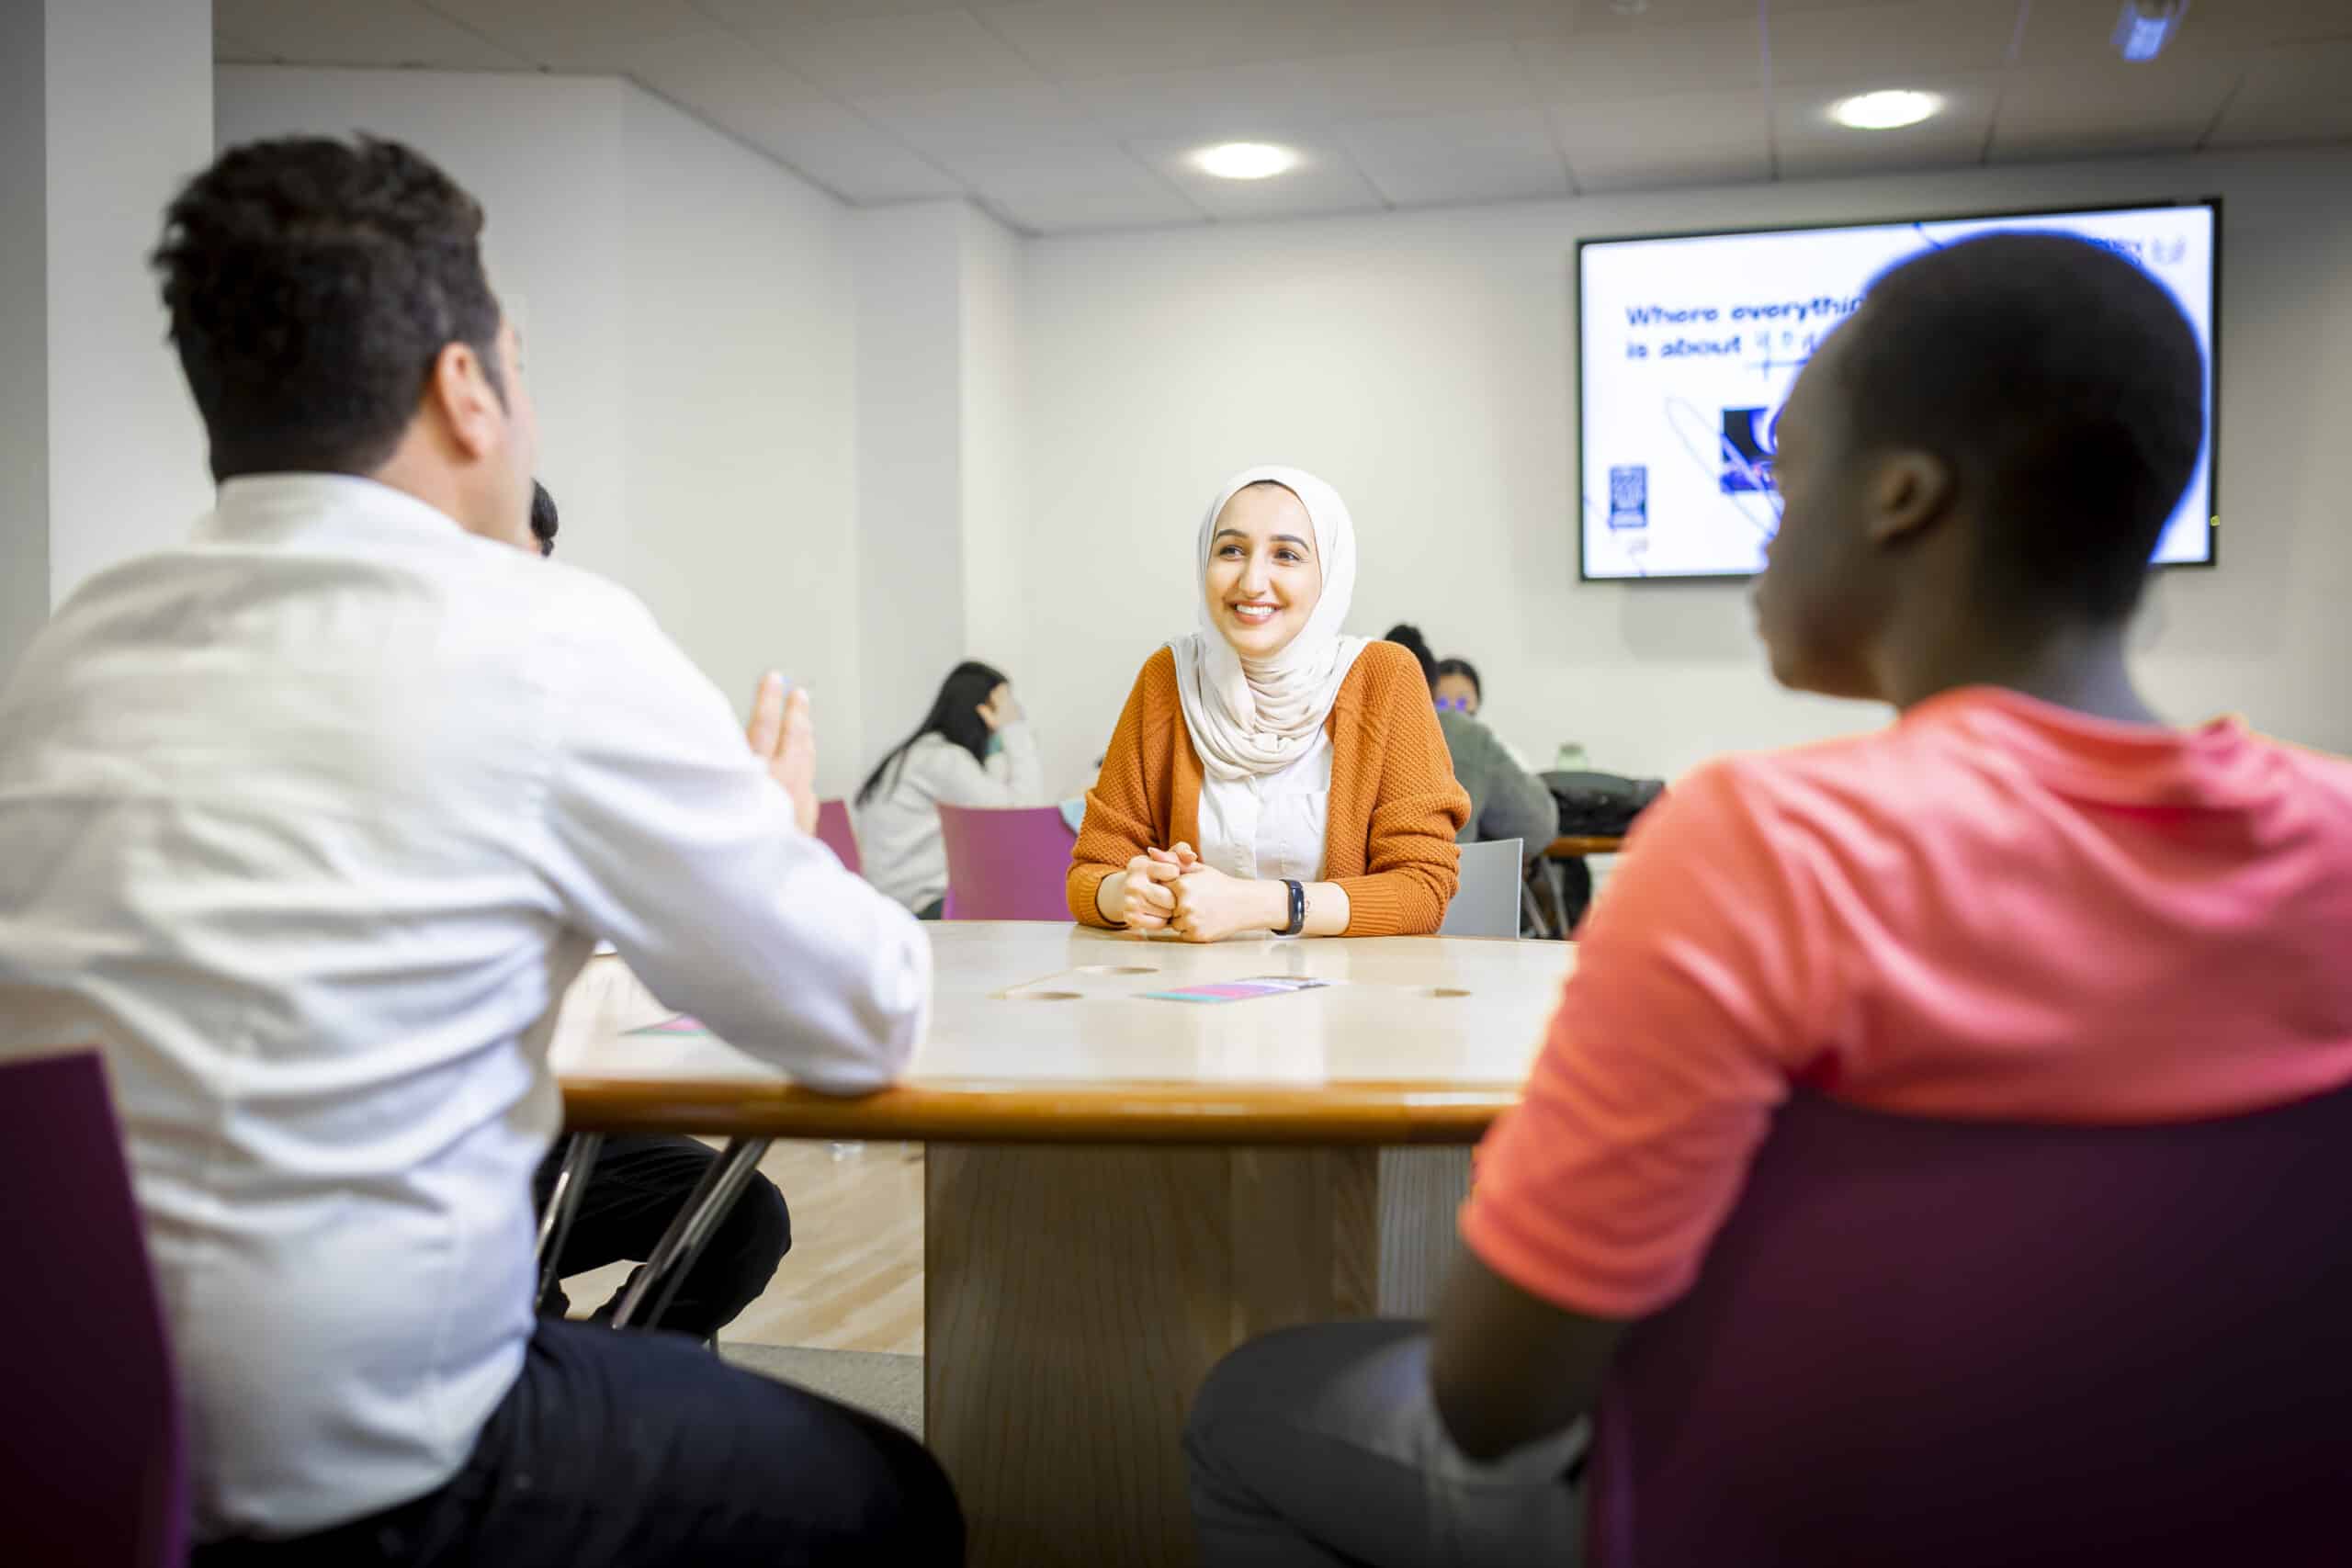 Coventry University is making legal careers accessible to students of all backgrounds